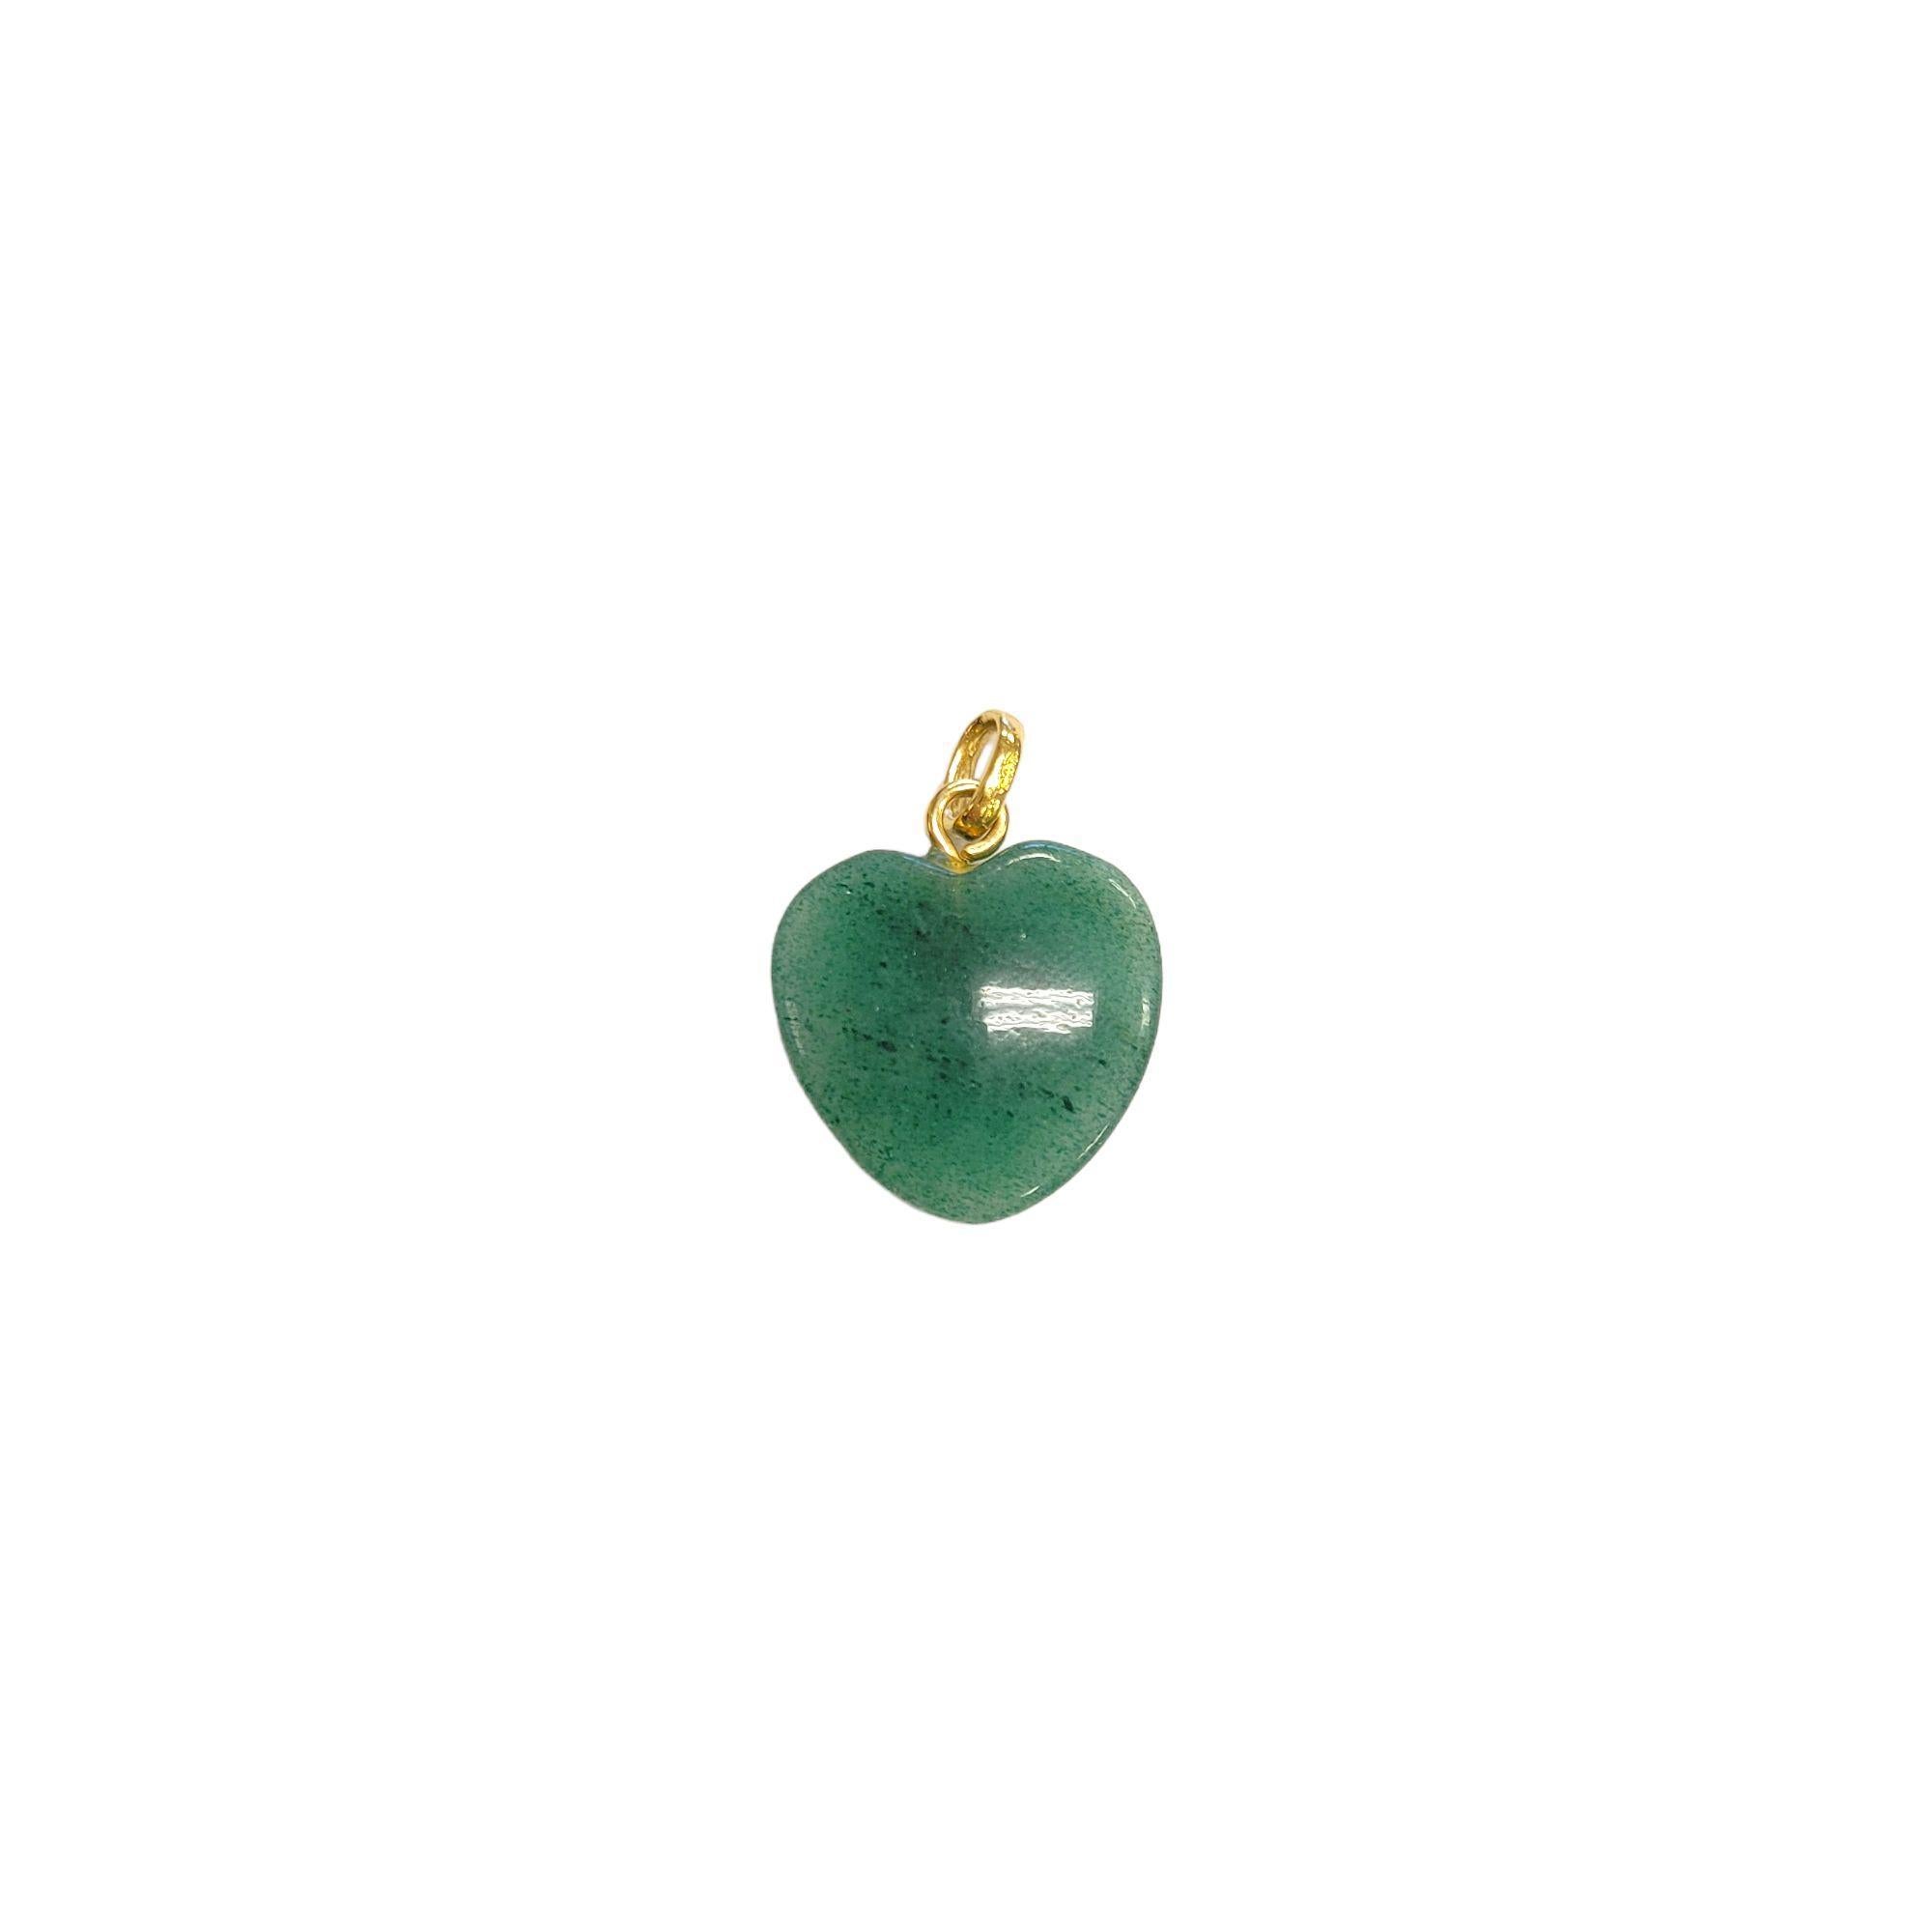 Gorgeous 18K yellow gold green heart pendant!

Size: 22mm X 19m X 5.5mm

Length w/ bail: 26.5mm

Weight: 3.0 g/ 1.9 dwt

Hallmark: 750

Very good condition, professionally polished.

Will come packaged in a gift box or pouch (when possible) and will